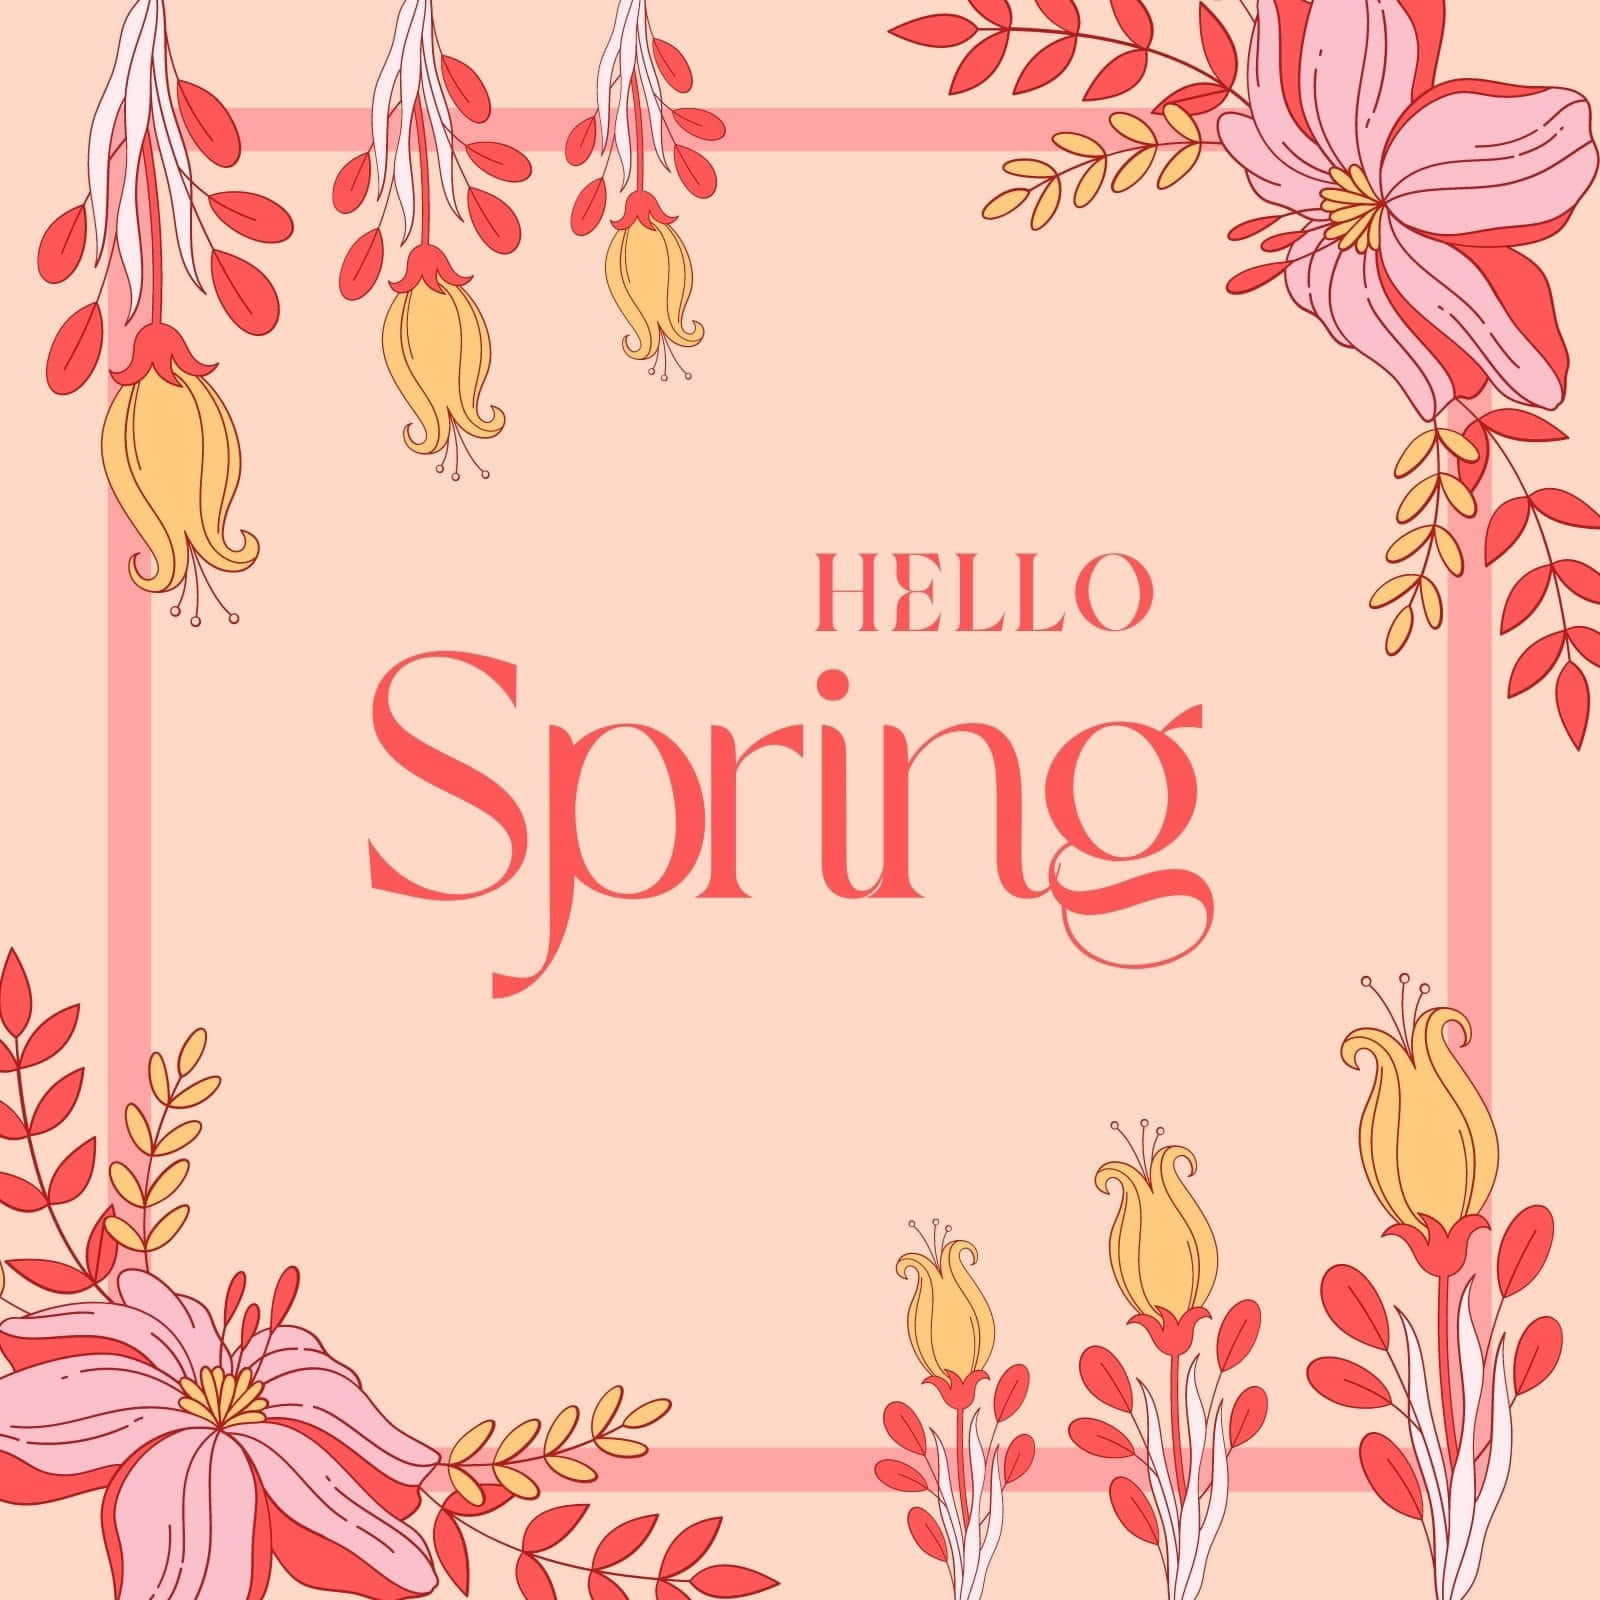 Hello Spring Floral Greeting Wallpaper